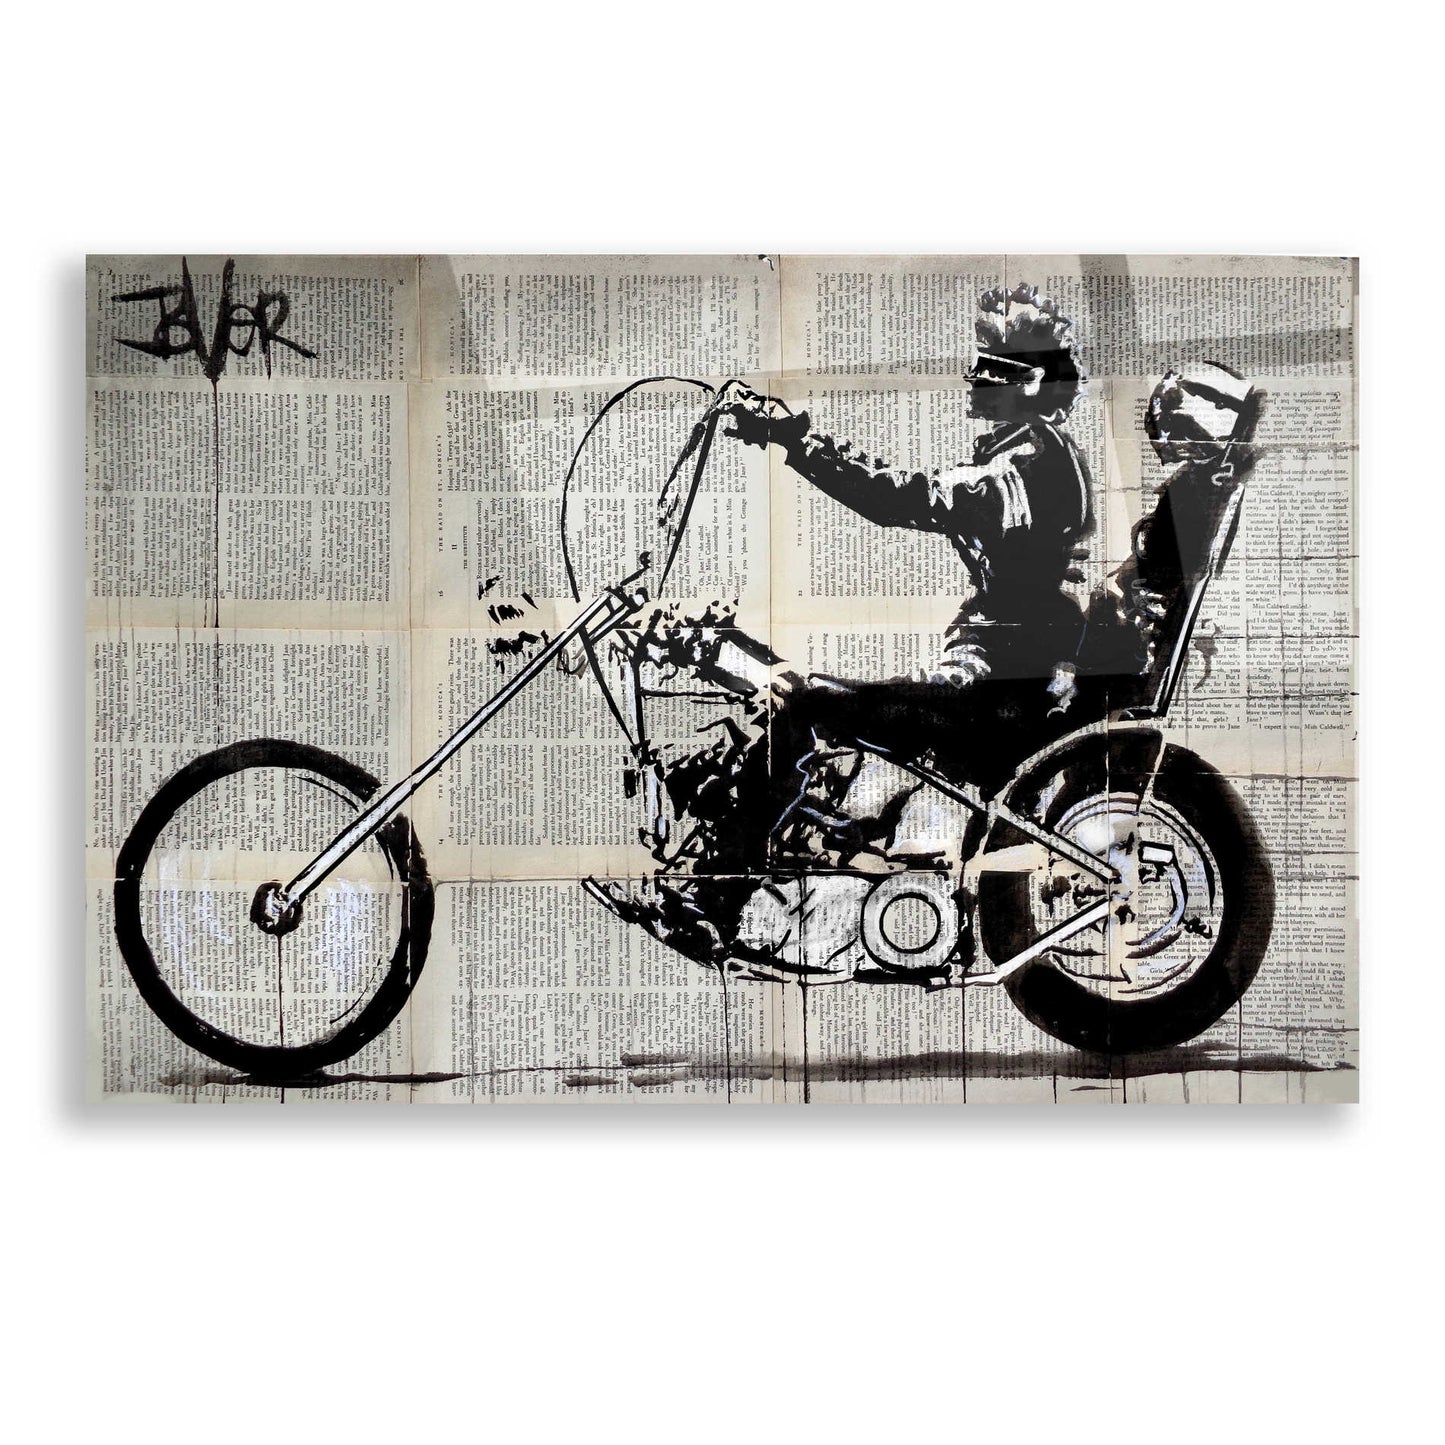 Epic Art 'Get Your Motor Running' by Loui Jover, Acrylic Glass Wall Art,16x12